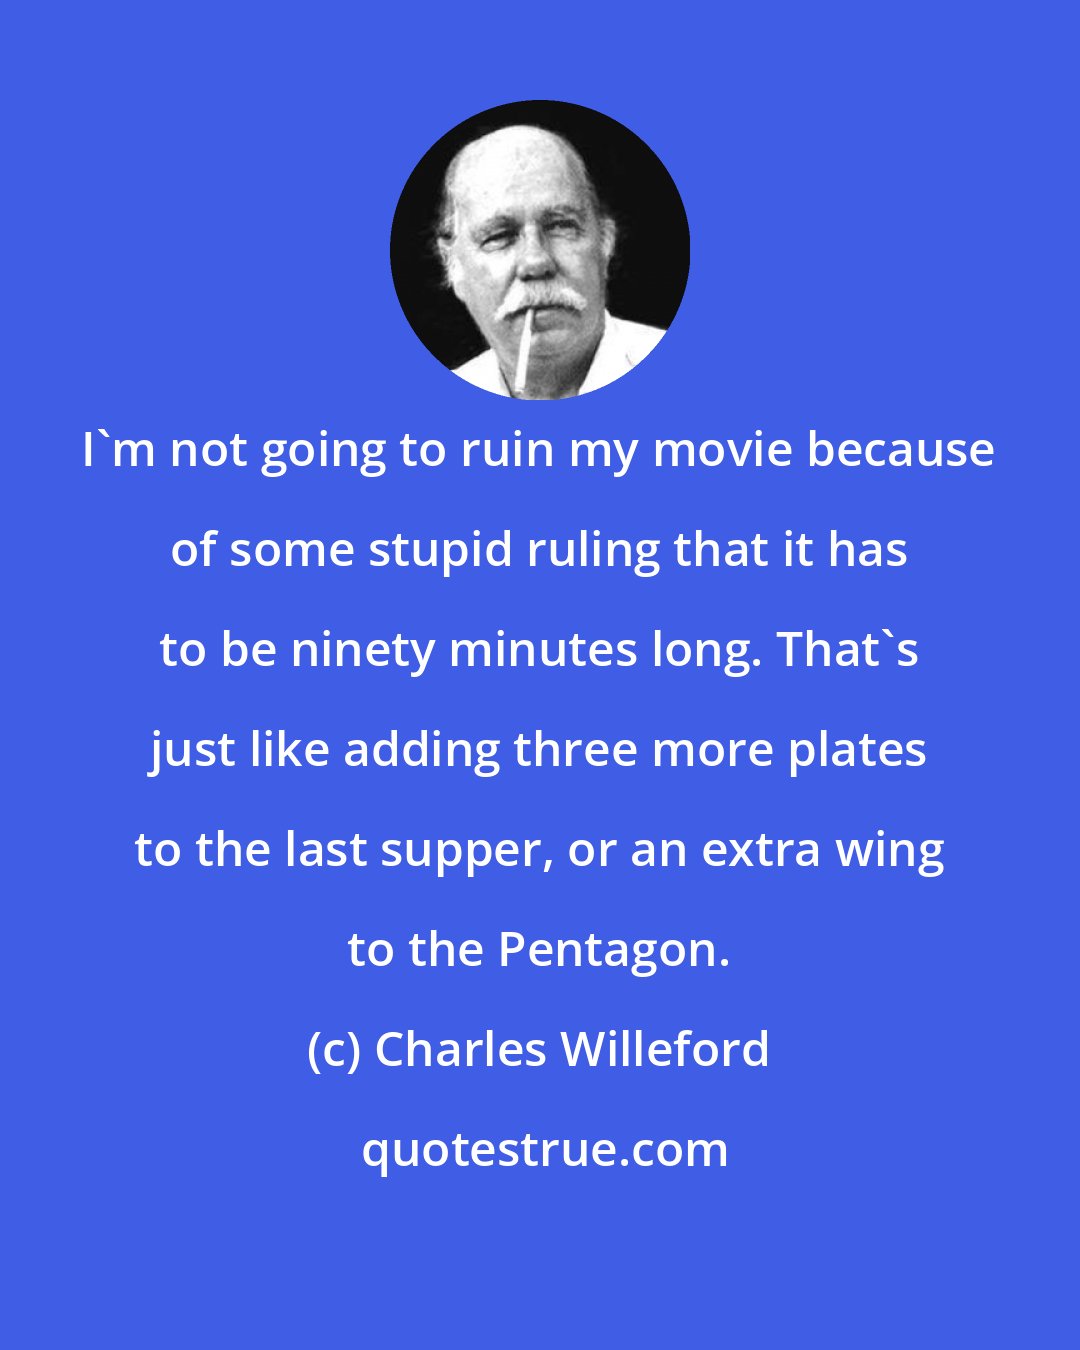 Charles Willeford: I'm not going to ruin my movie because of some stupid ruling that it has to be ninety minutes long. That's just like adding three more plates to the last supper, or an extra wing to the Pentagon.